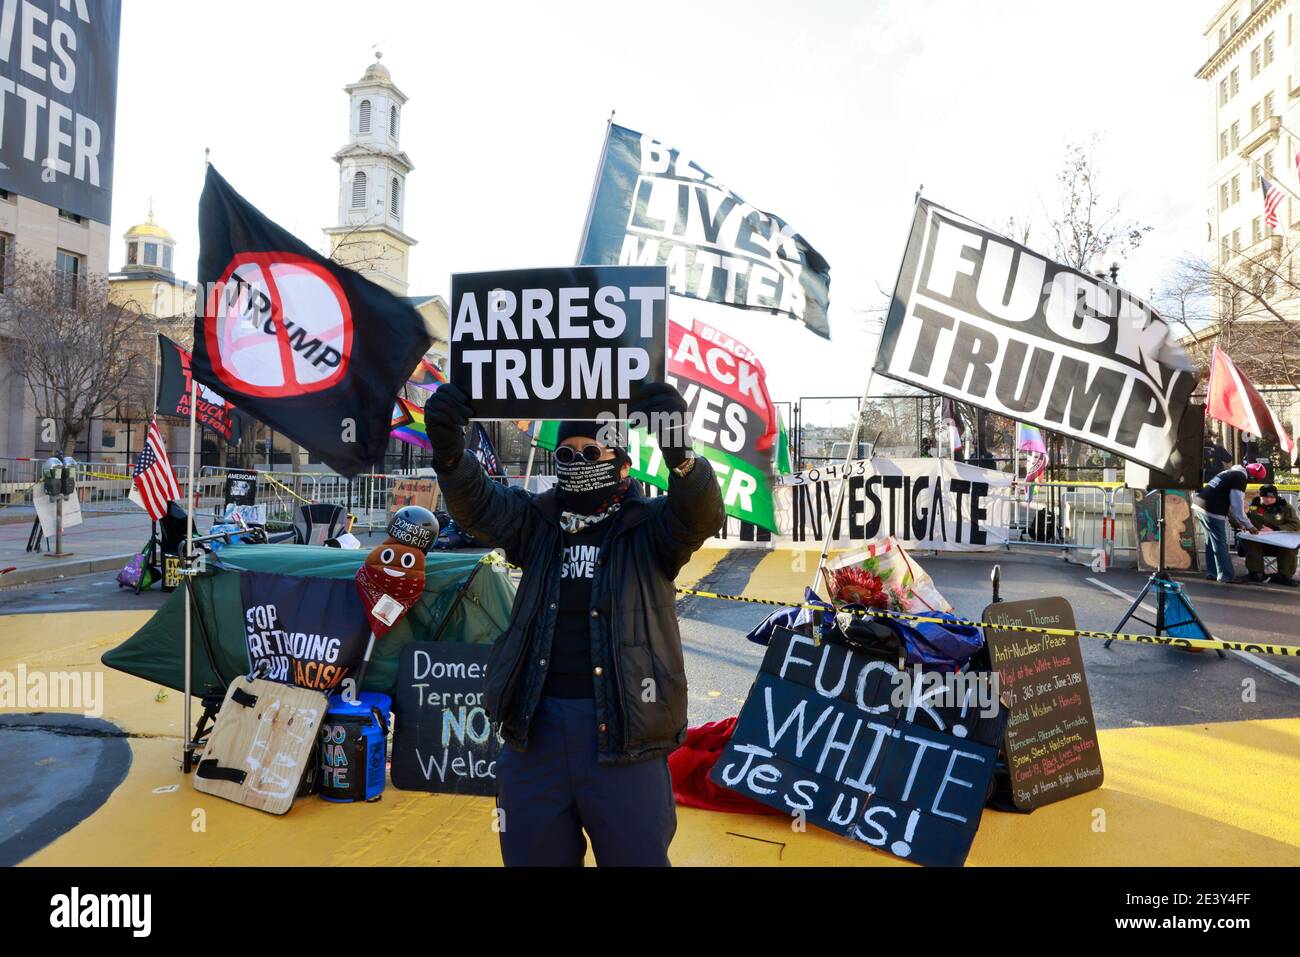 Activist Laurie Arbeiter holds a sign reading 'Arrest Trump' at Black Lives Matter Plaza after the departure of Donald J. Trump’s helicopter at the white house on the inauguration day of President Joe Biden and Vice President Kamala Harris. Stock Photo